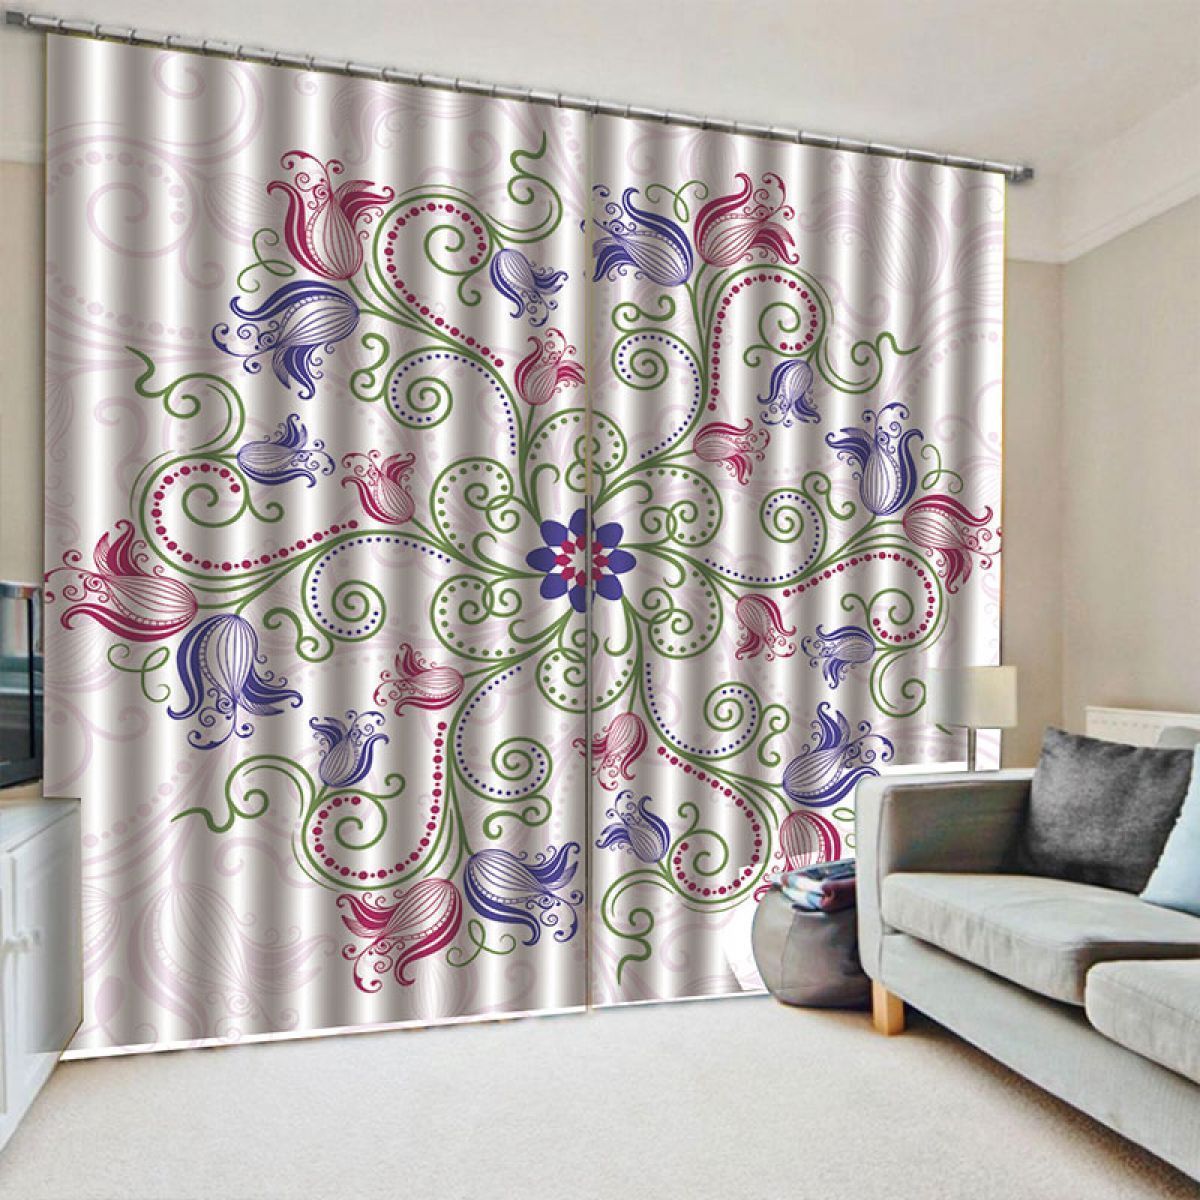 3d Floral Printed Window Curtain Home Decor